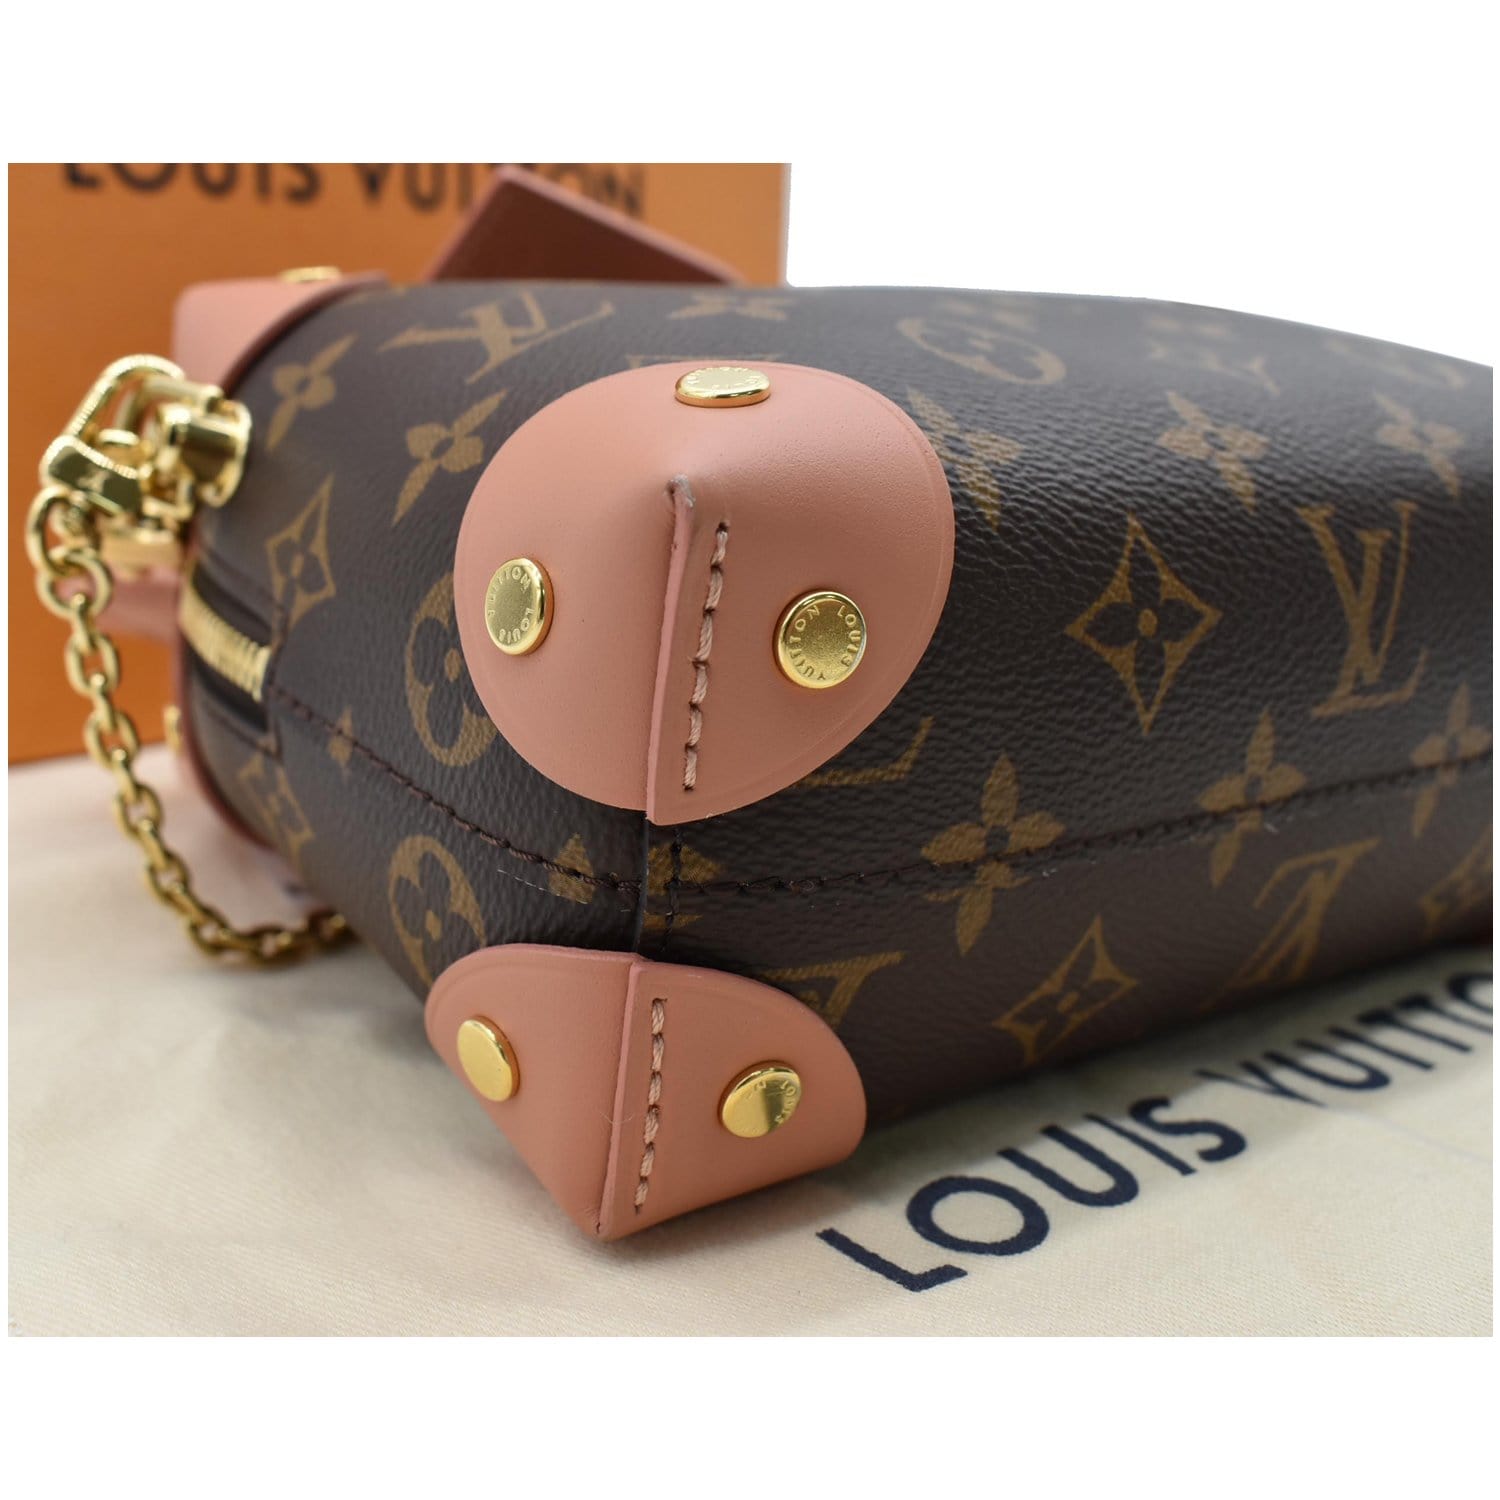 Brand new with box LV PETITE MALLE SOUPLE bag